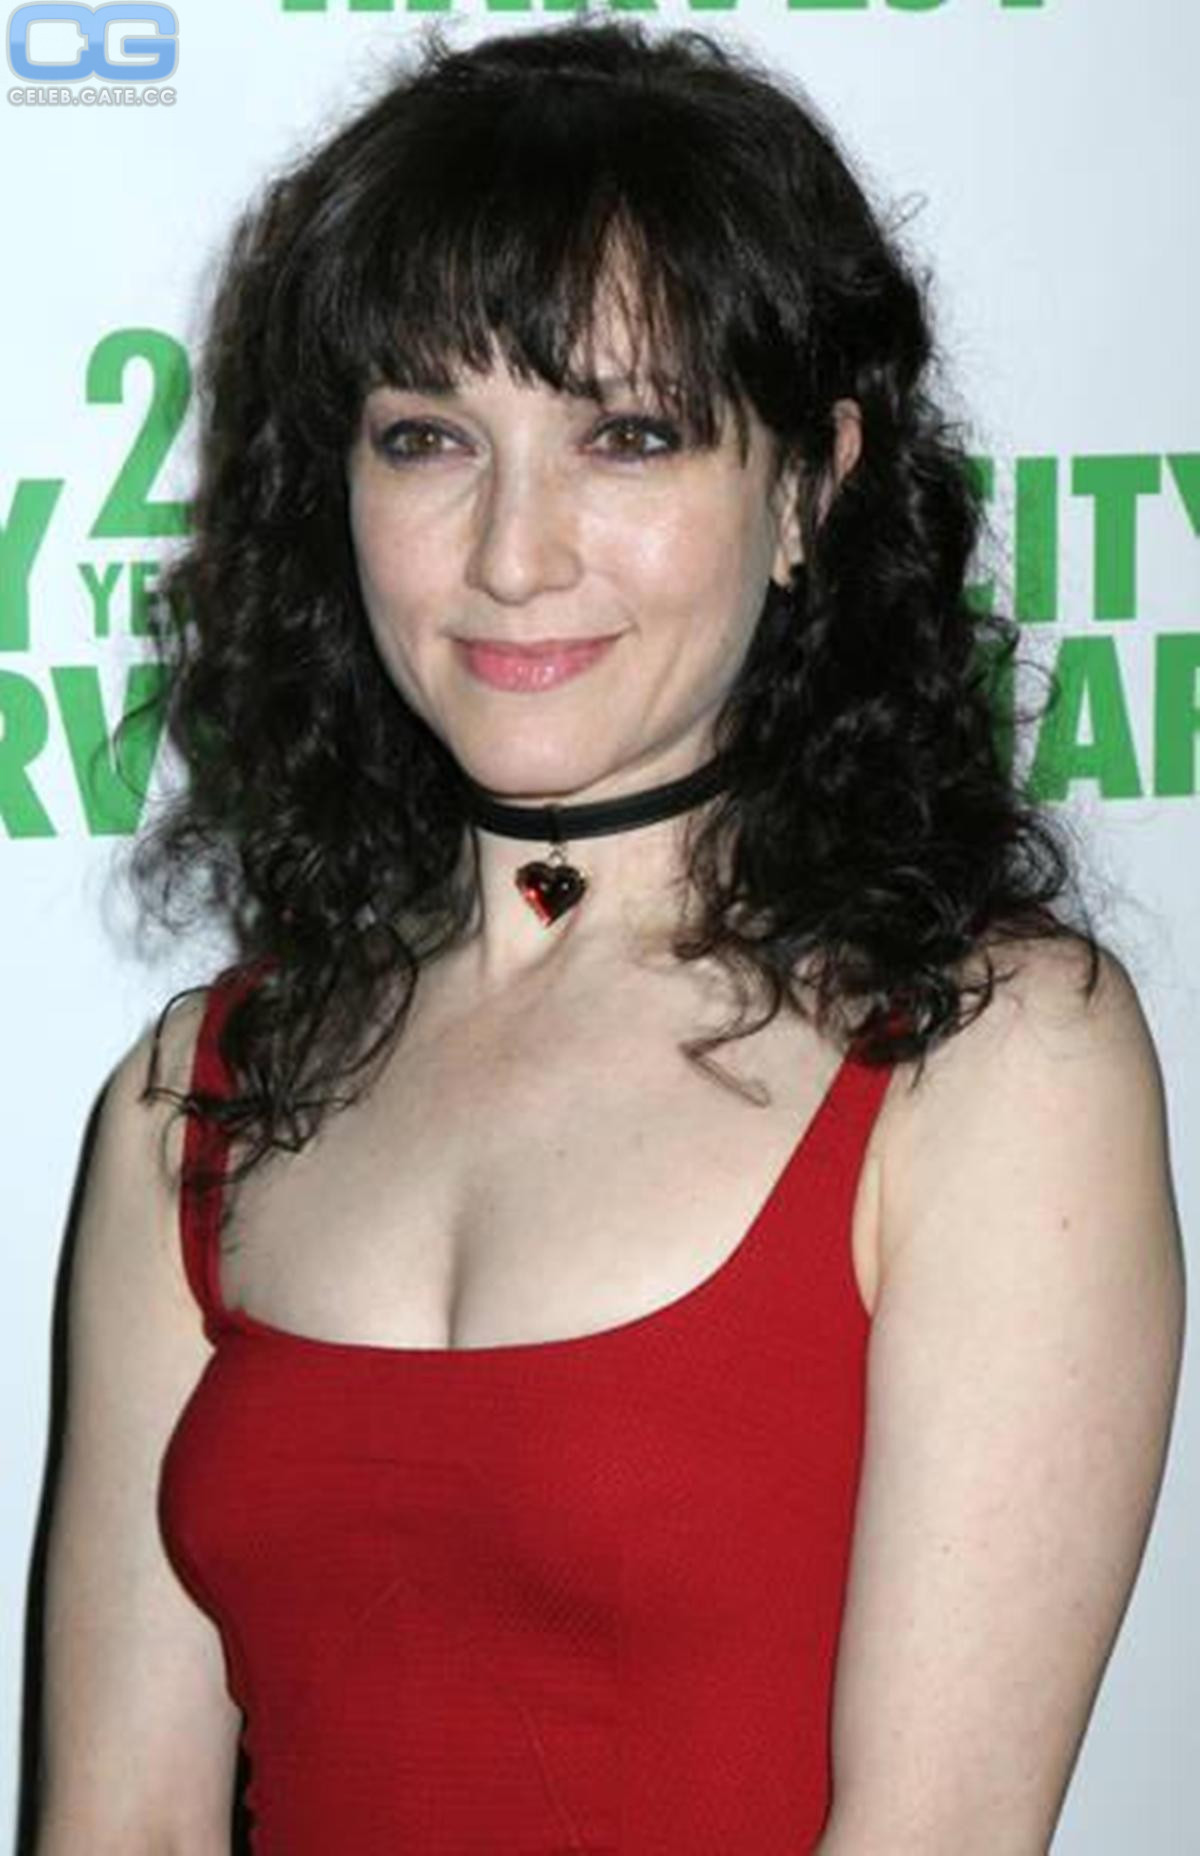 angie yeates recommends bebe neuwirth naked pic